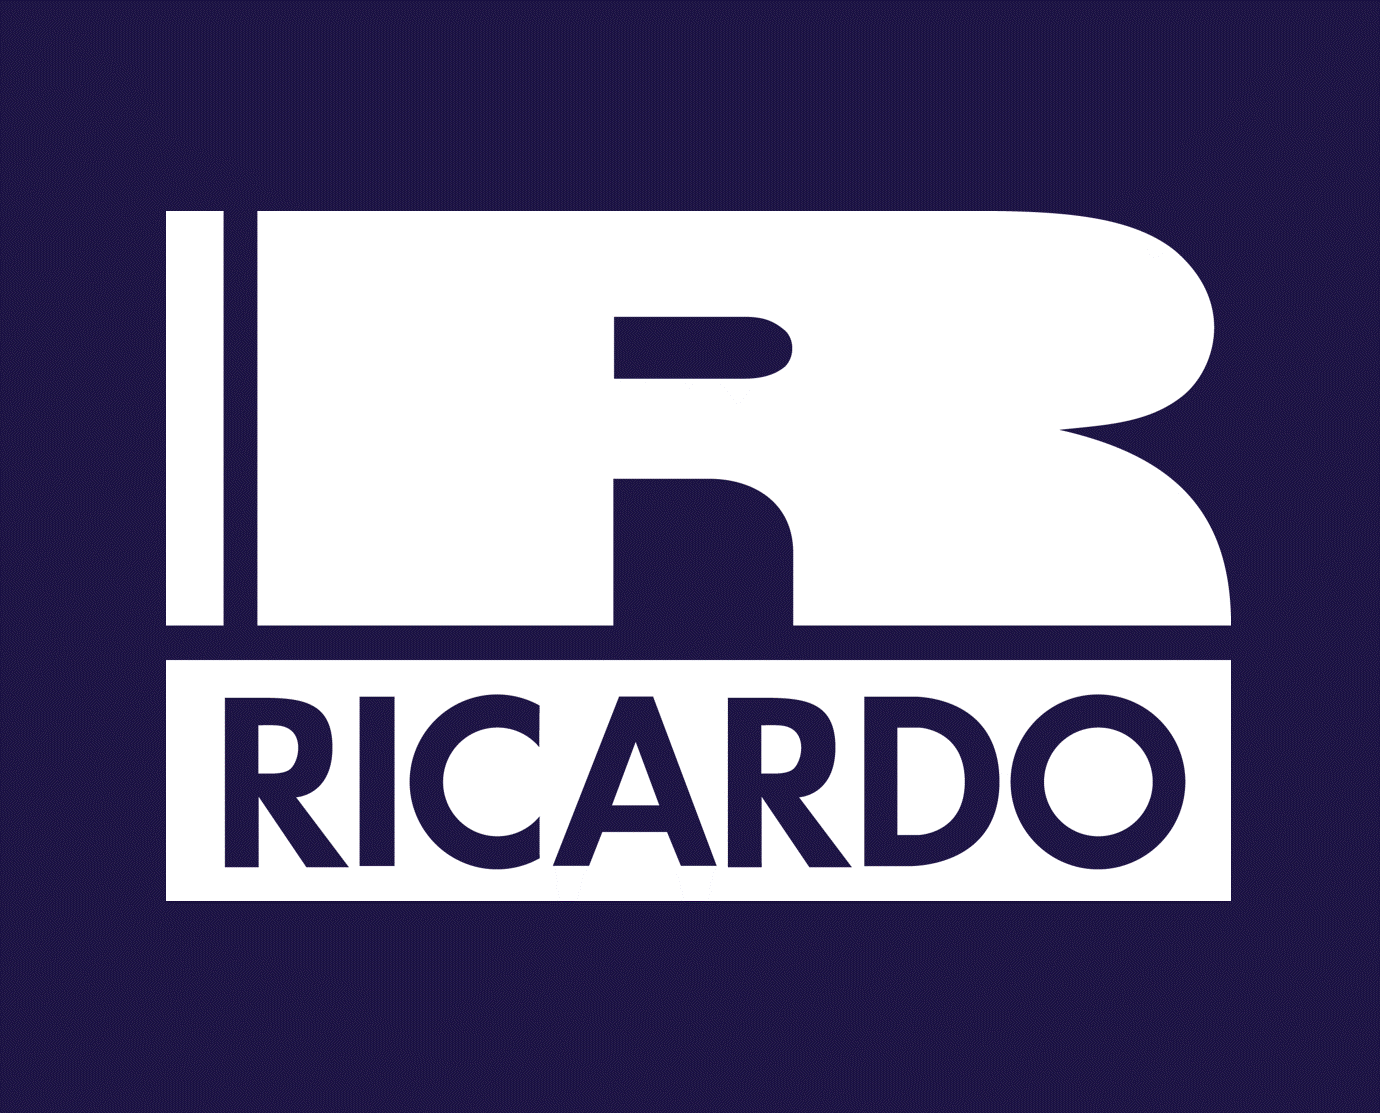 Trading update FY22/23: Ricardo expects to report full year results in line with Board's expectations image